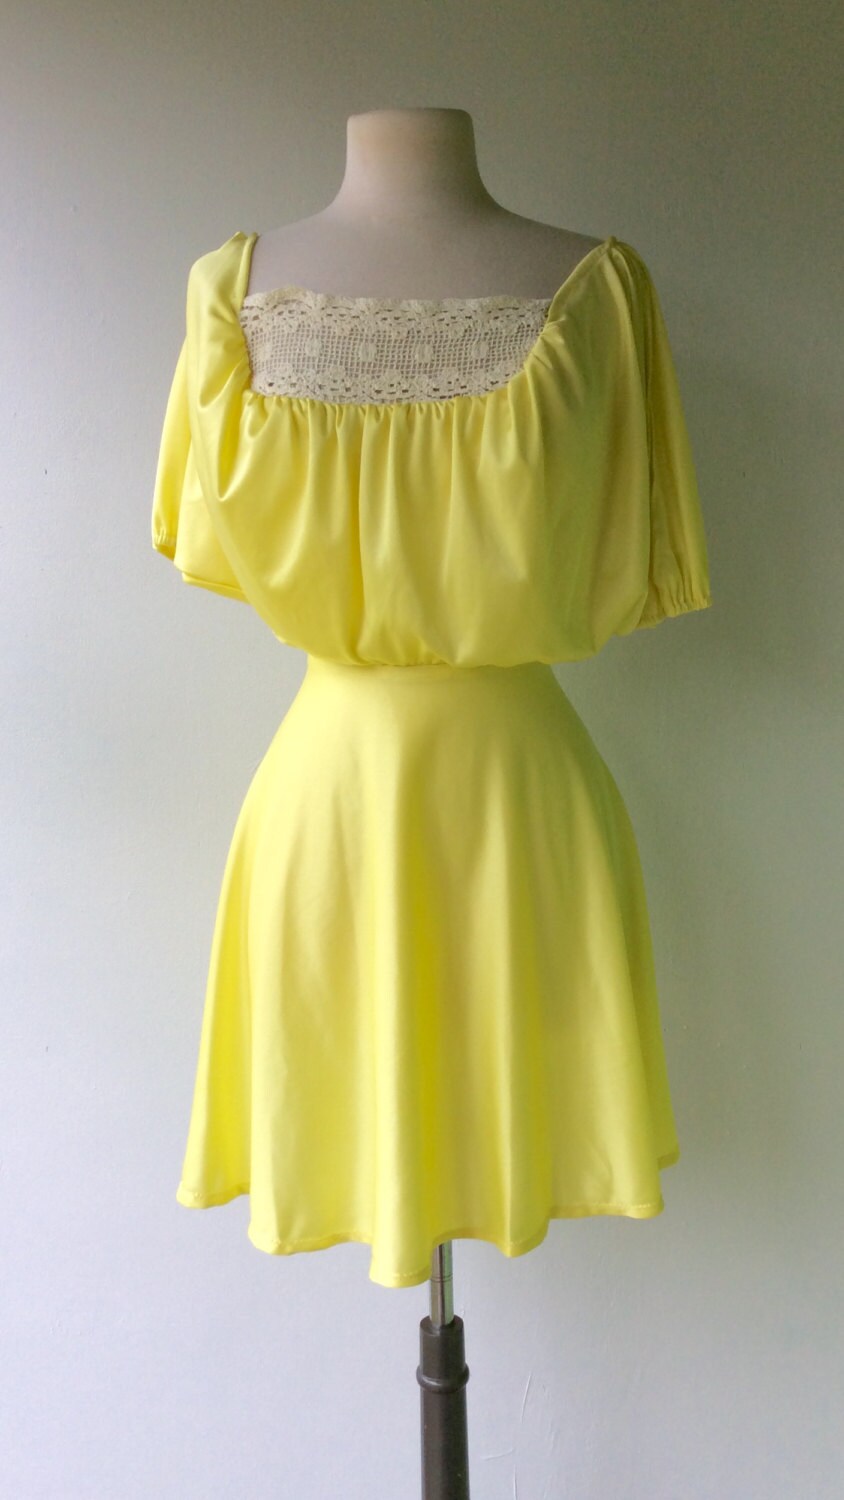 REVIVED Yellow Vintage 1970s Mini Dress with Lace Detail // | Etsy